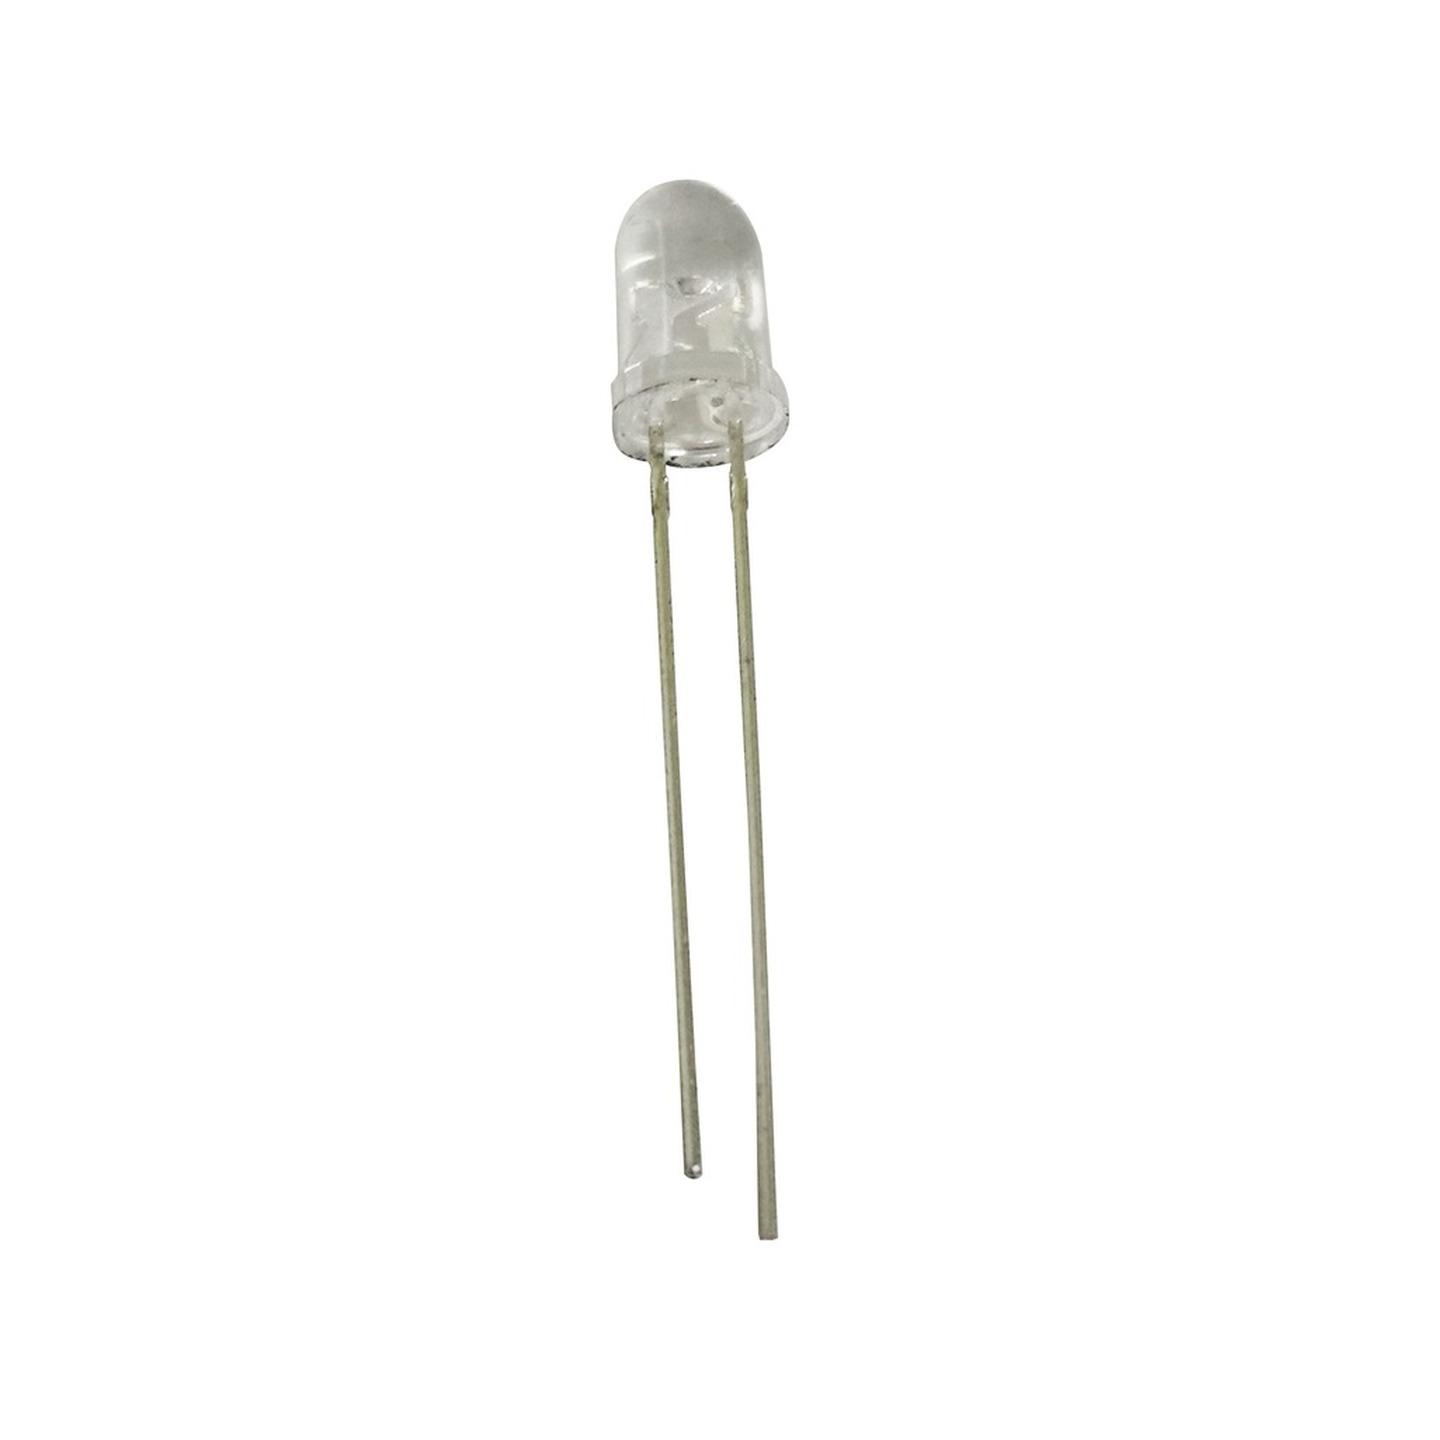 Green 5mm Cree LED 64600mcd Round Clear